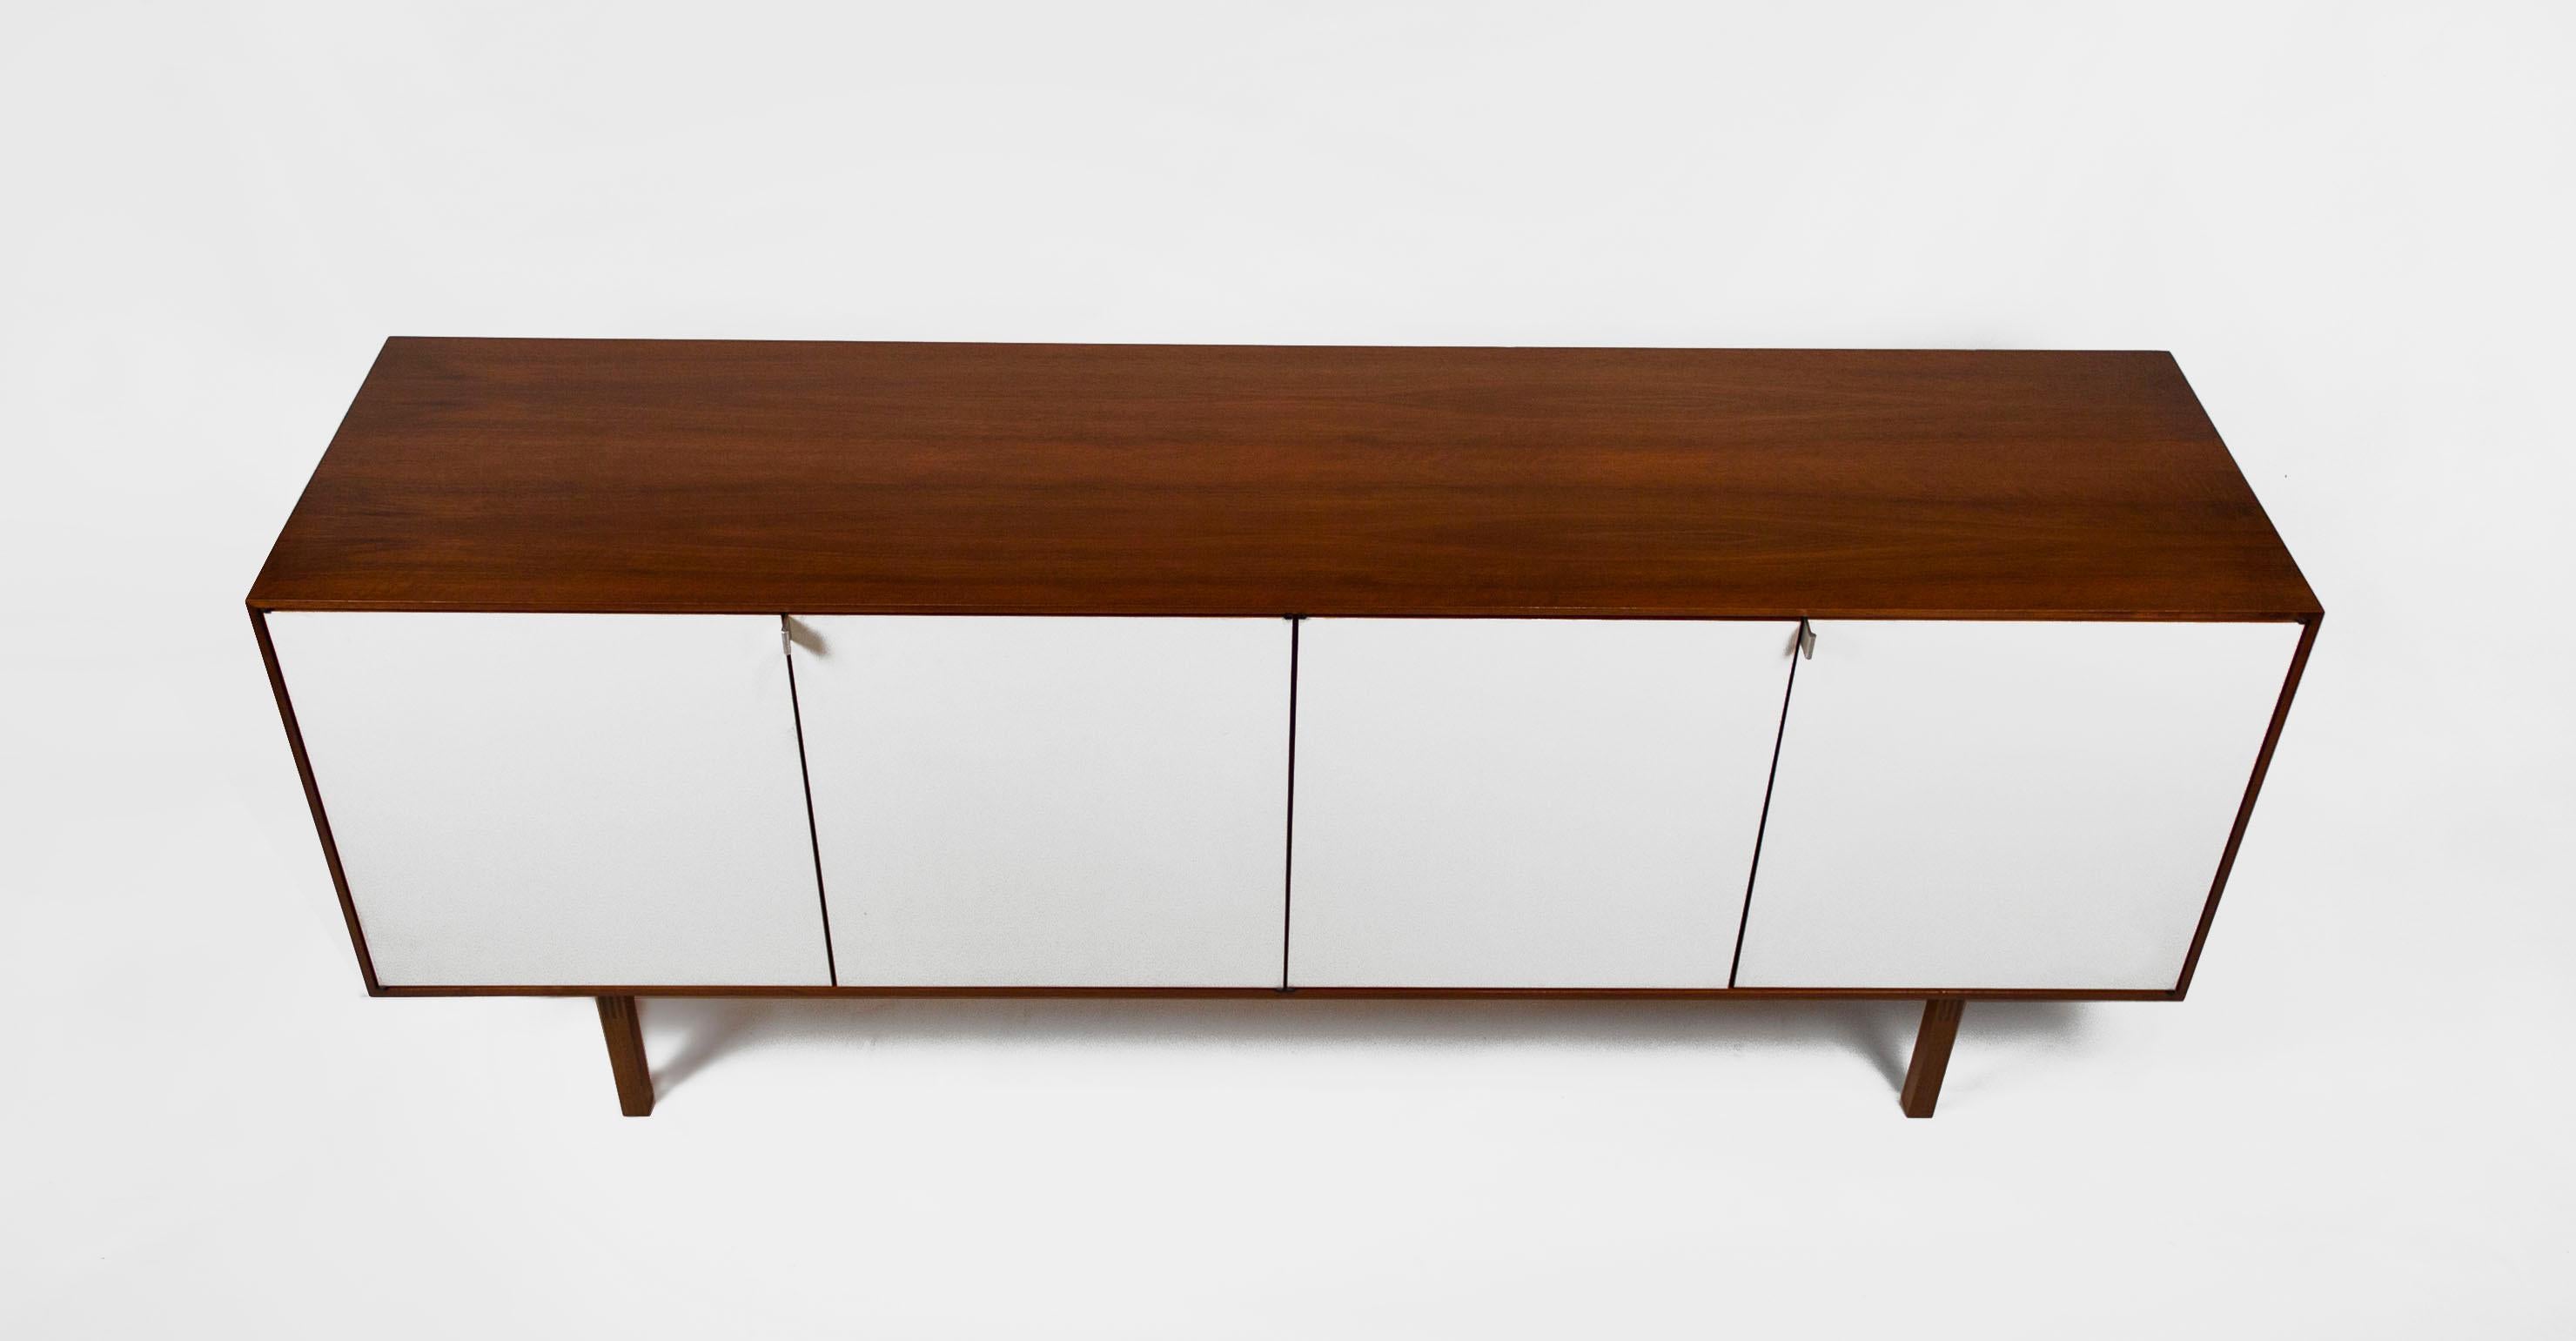 Early Model 541 credenza designed by Florence Knoll and Produced in the Knoll factory in Stuttgart Germany, the birthplace of Hans Knoll. The piece consists of walnut exterior cabinetry with maple interiors, drawers and adjustable shelves. This